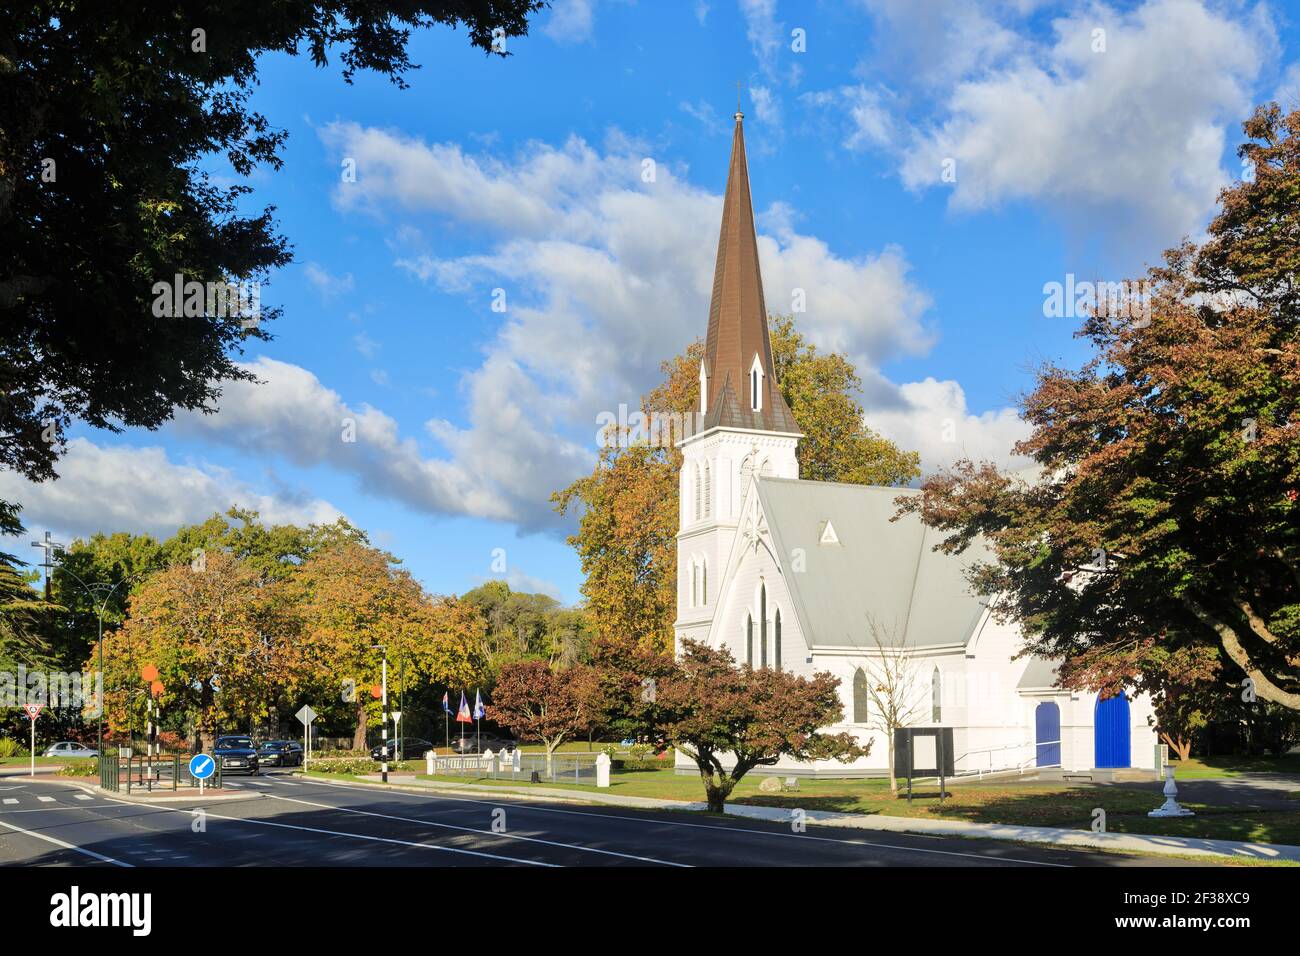 St. Andrew's Anglican Church (built 1881), Cambridge, New Zealand, surrounded by autumn trees Stock Photo